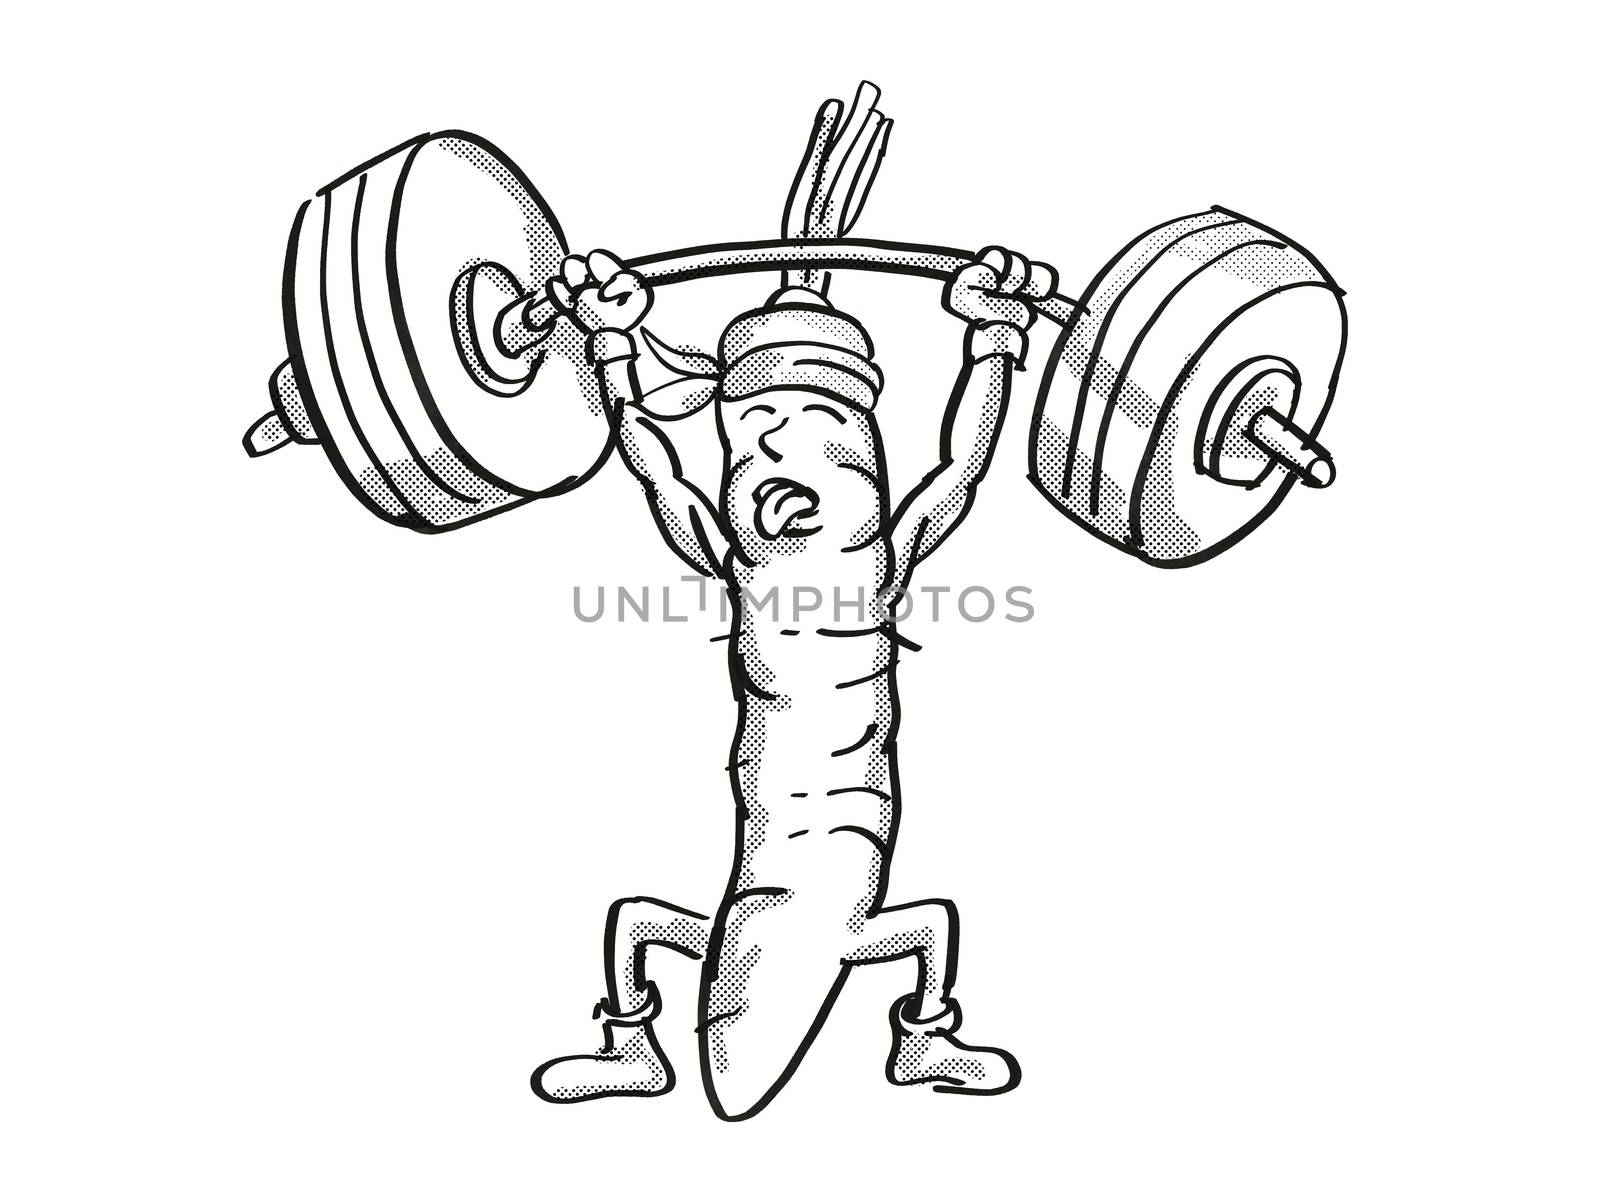 Carrot Healthy Vegetable Lifting Barbell Cartoon Retro Drawing by patrimonio